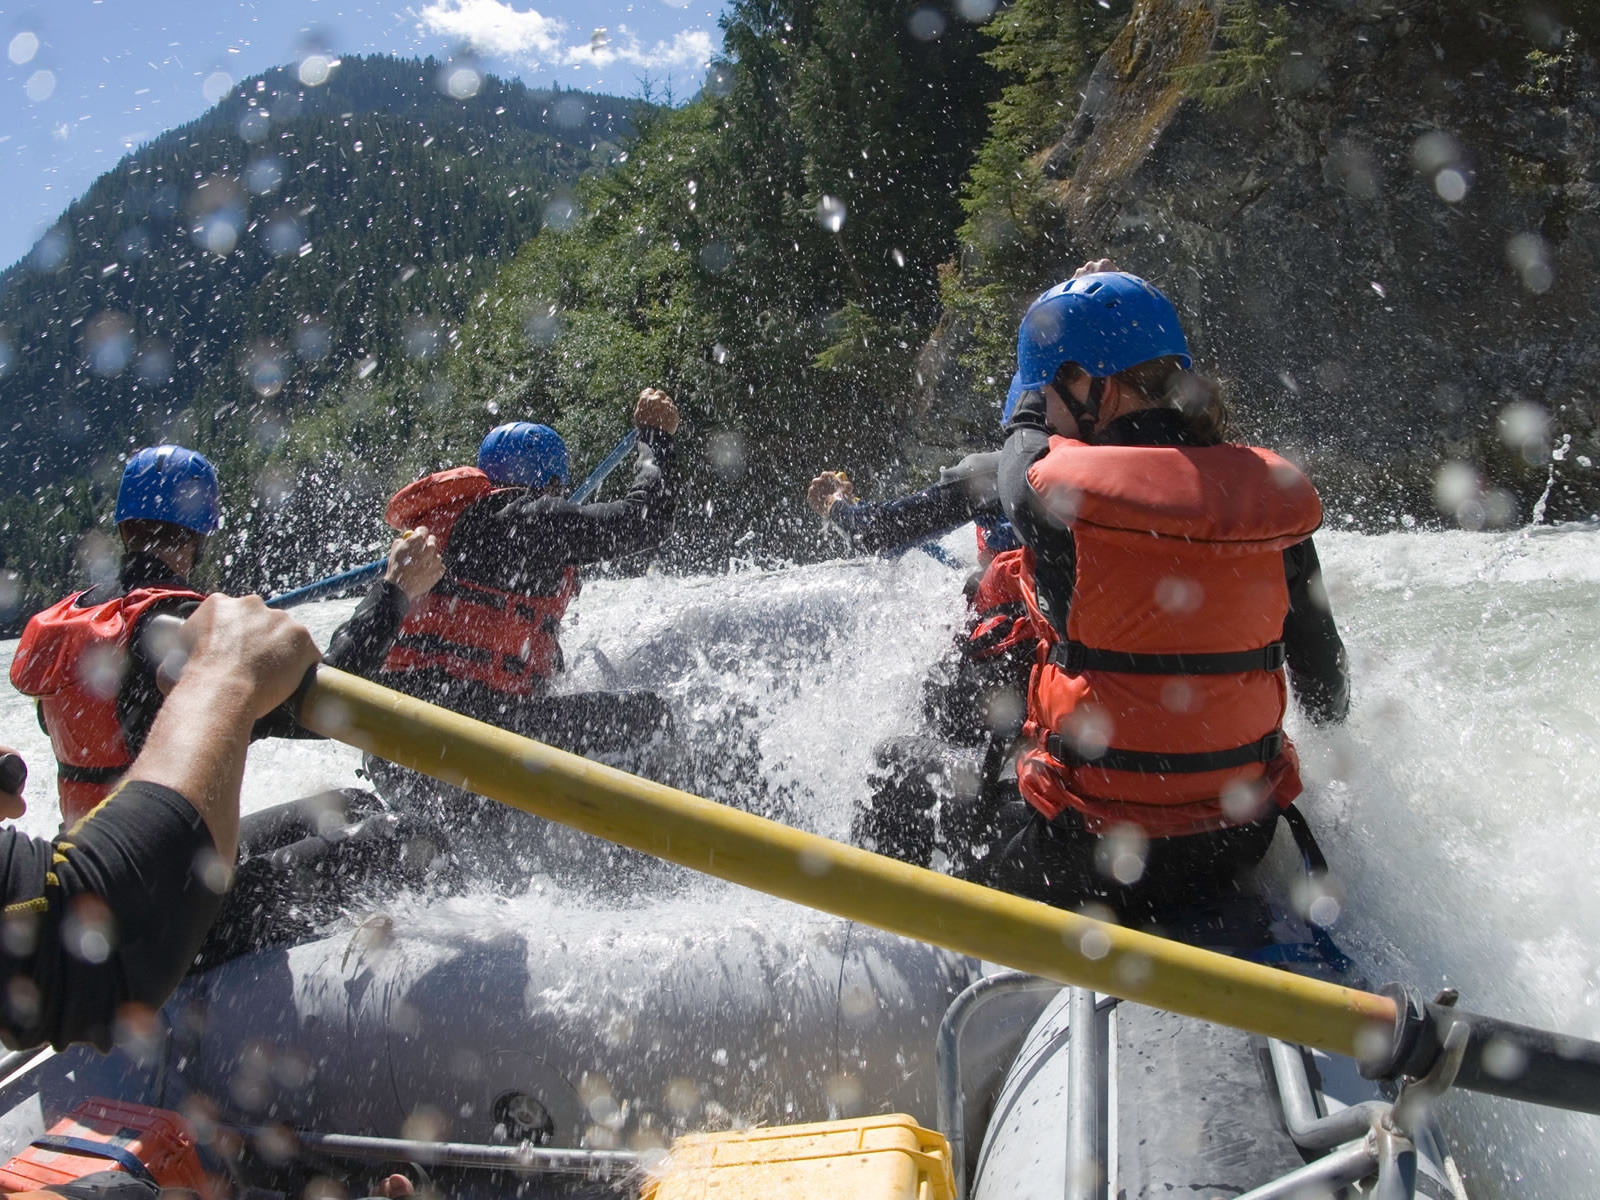 Rafting team for 1600 x 1200 resolution